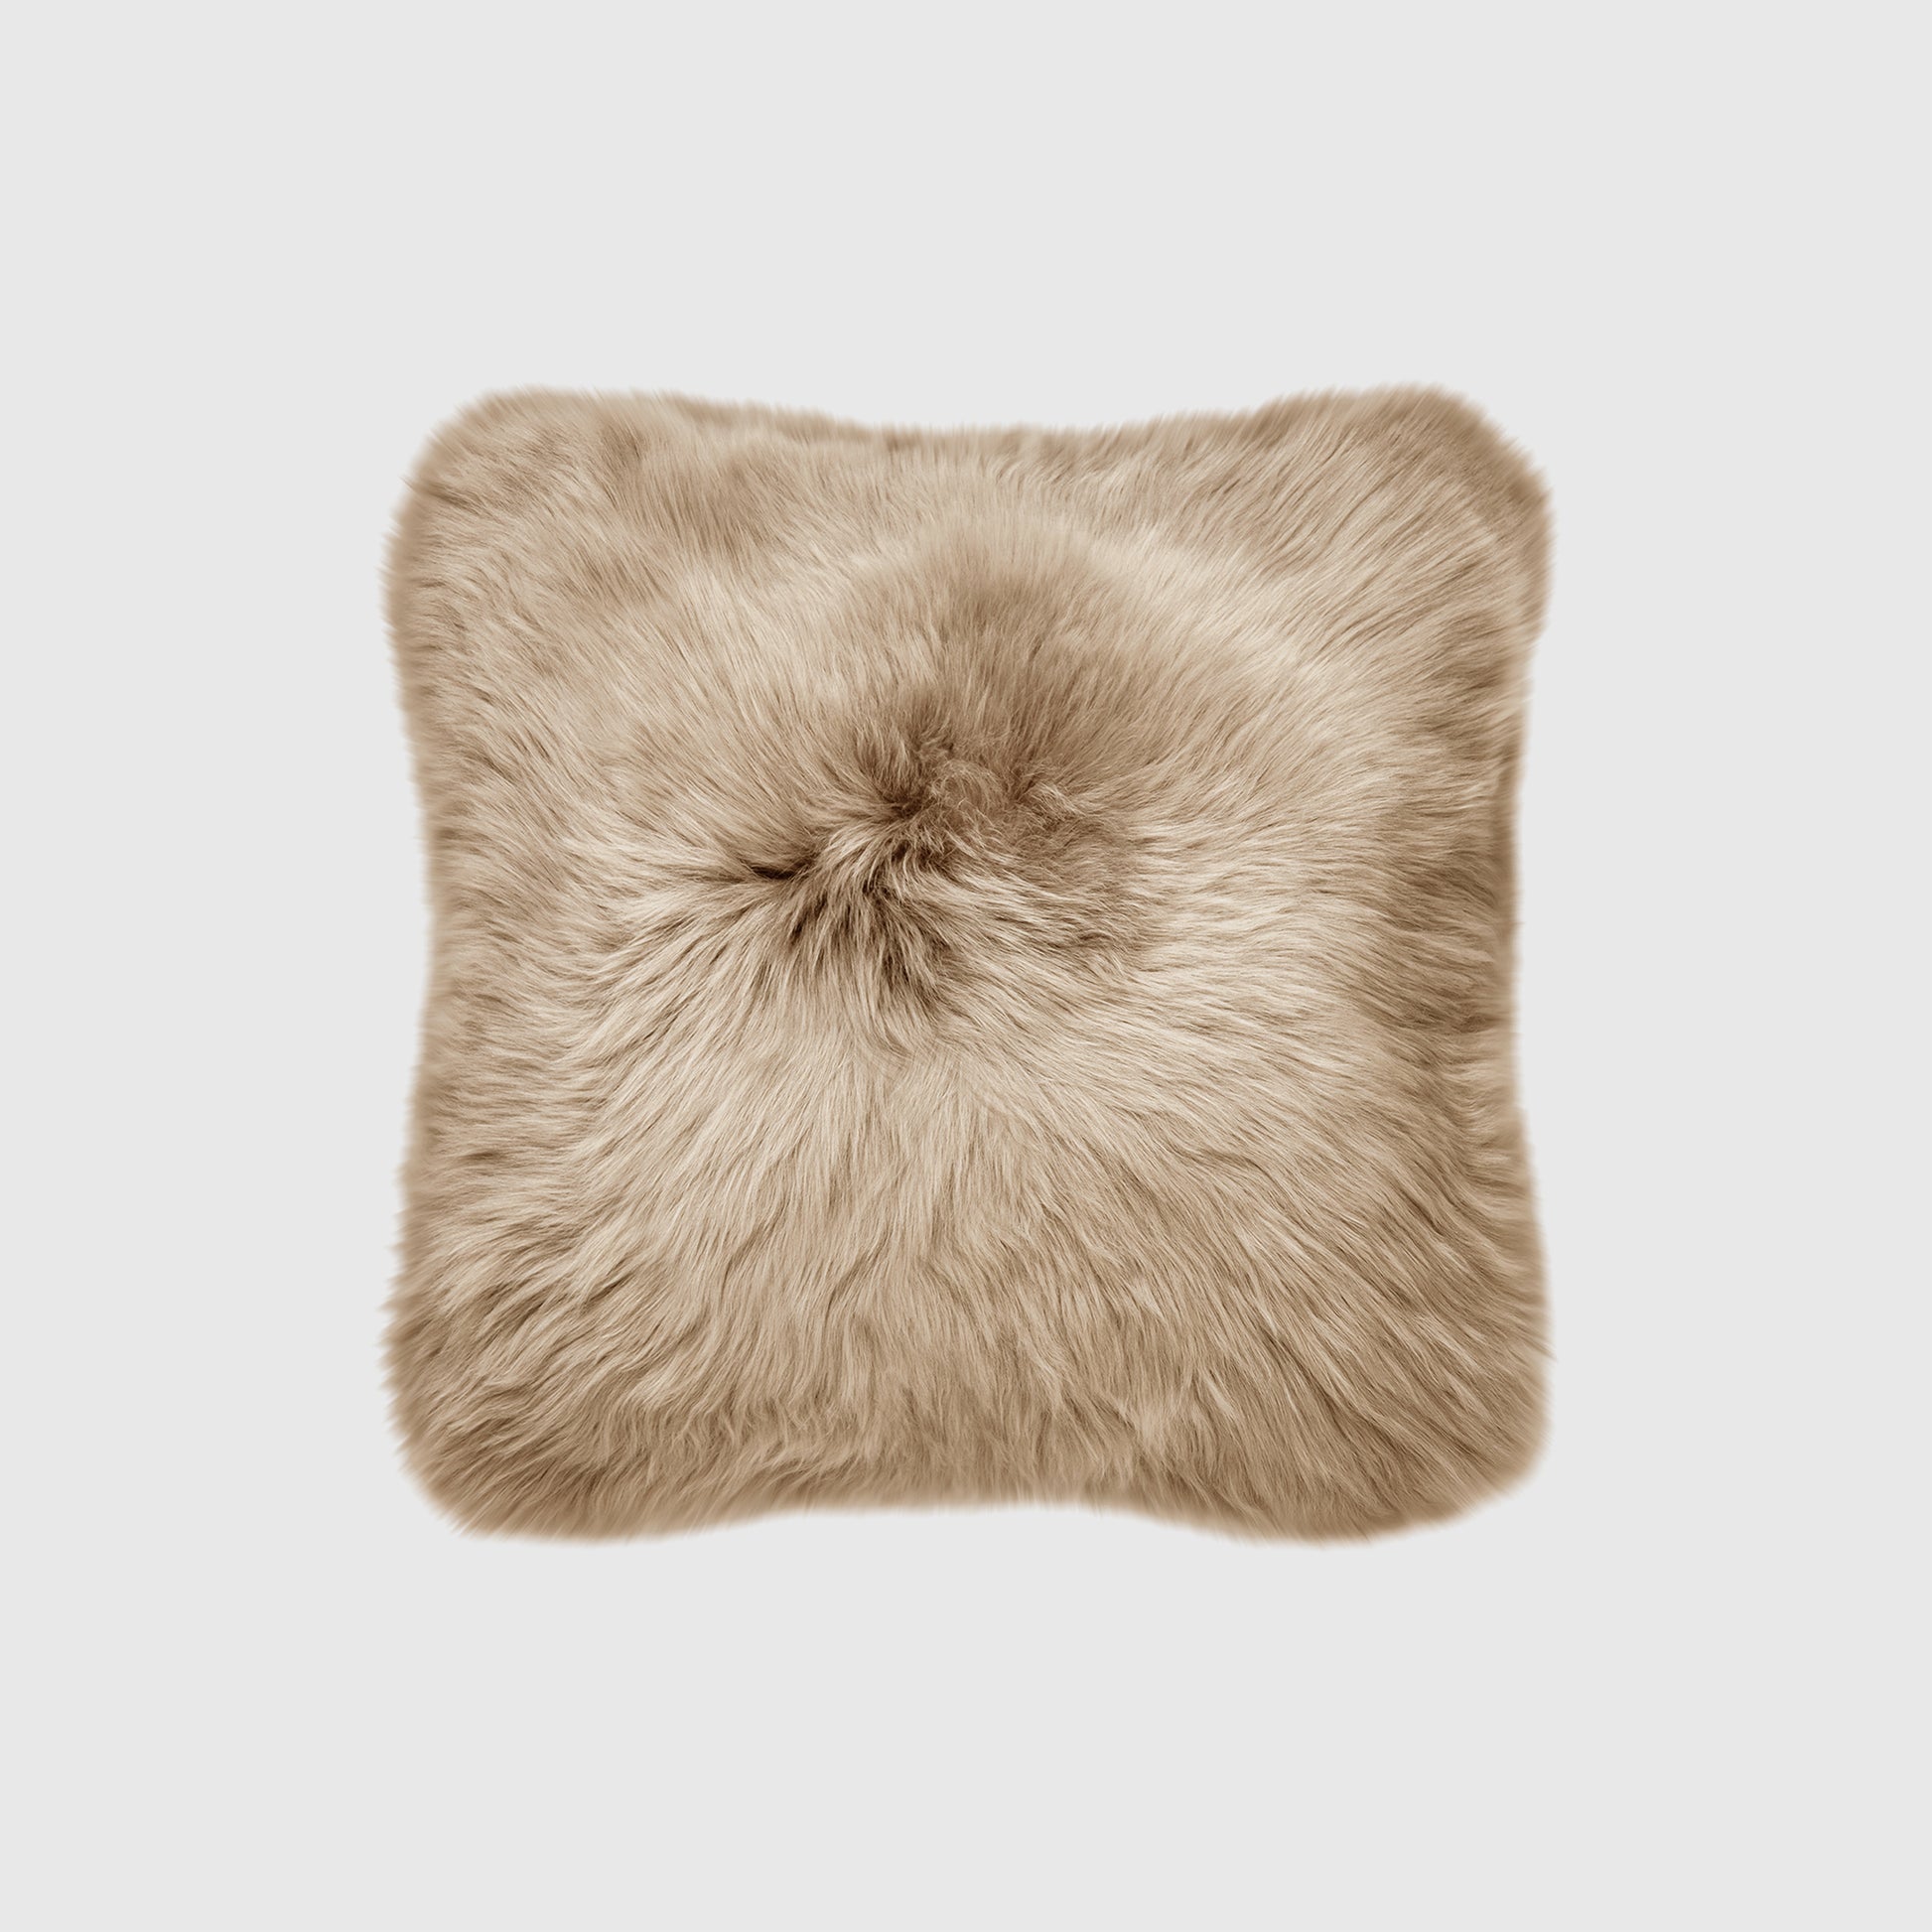 The Mood | Charlie Sheepskin Double-sided 16"x16" Pillow, Sand Brown